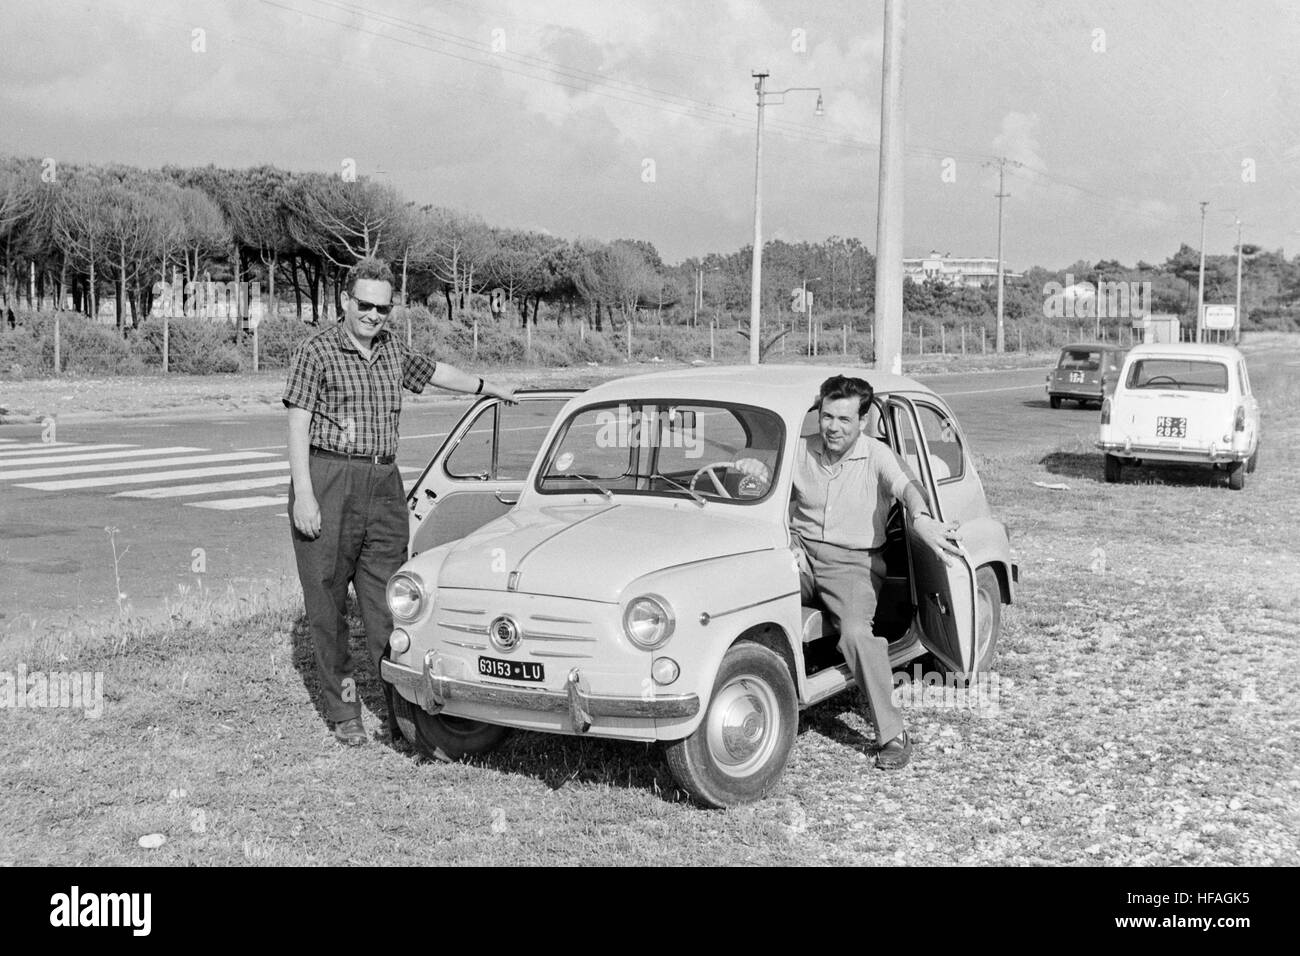 Two men posing with a Fiat 500 motor car in Italy during the 1960s. Stock Photo